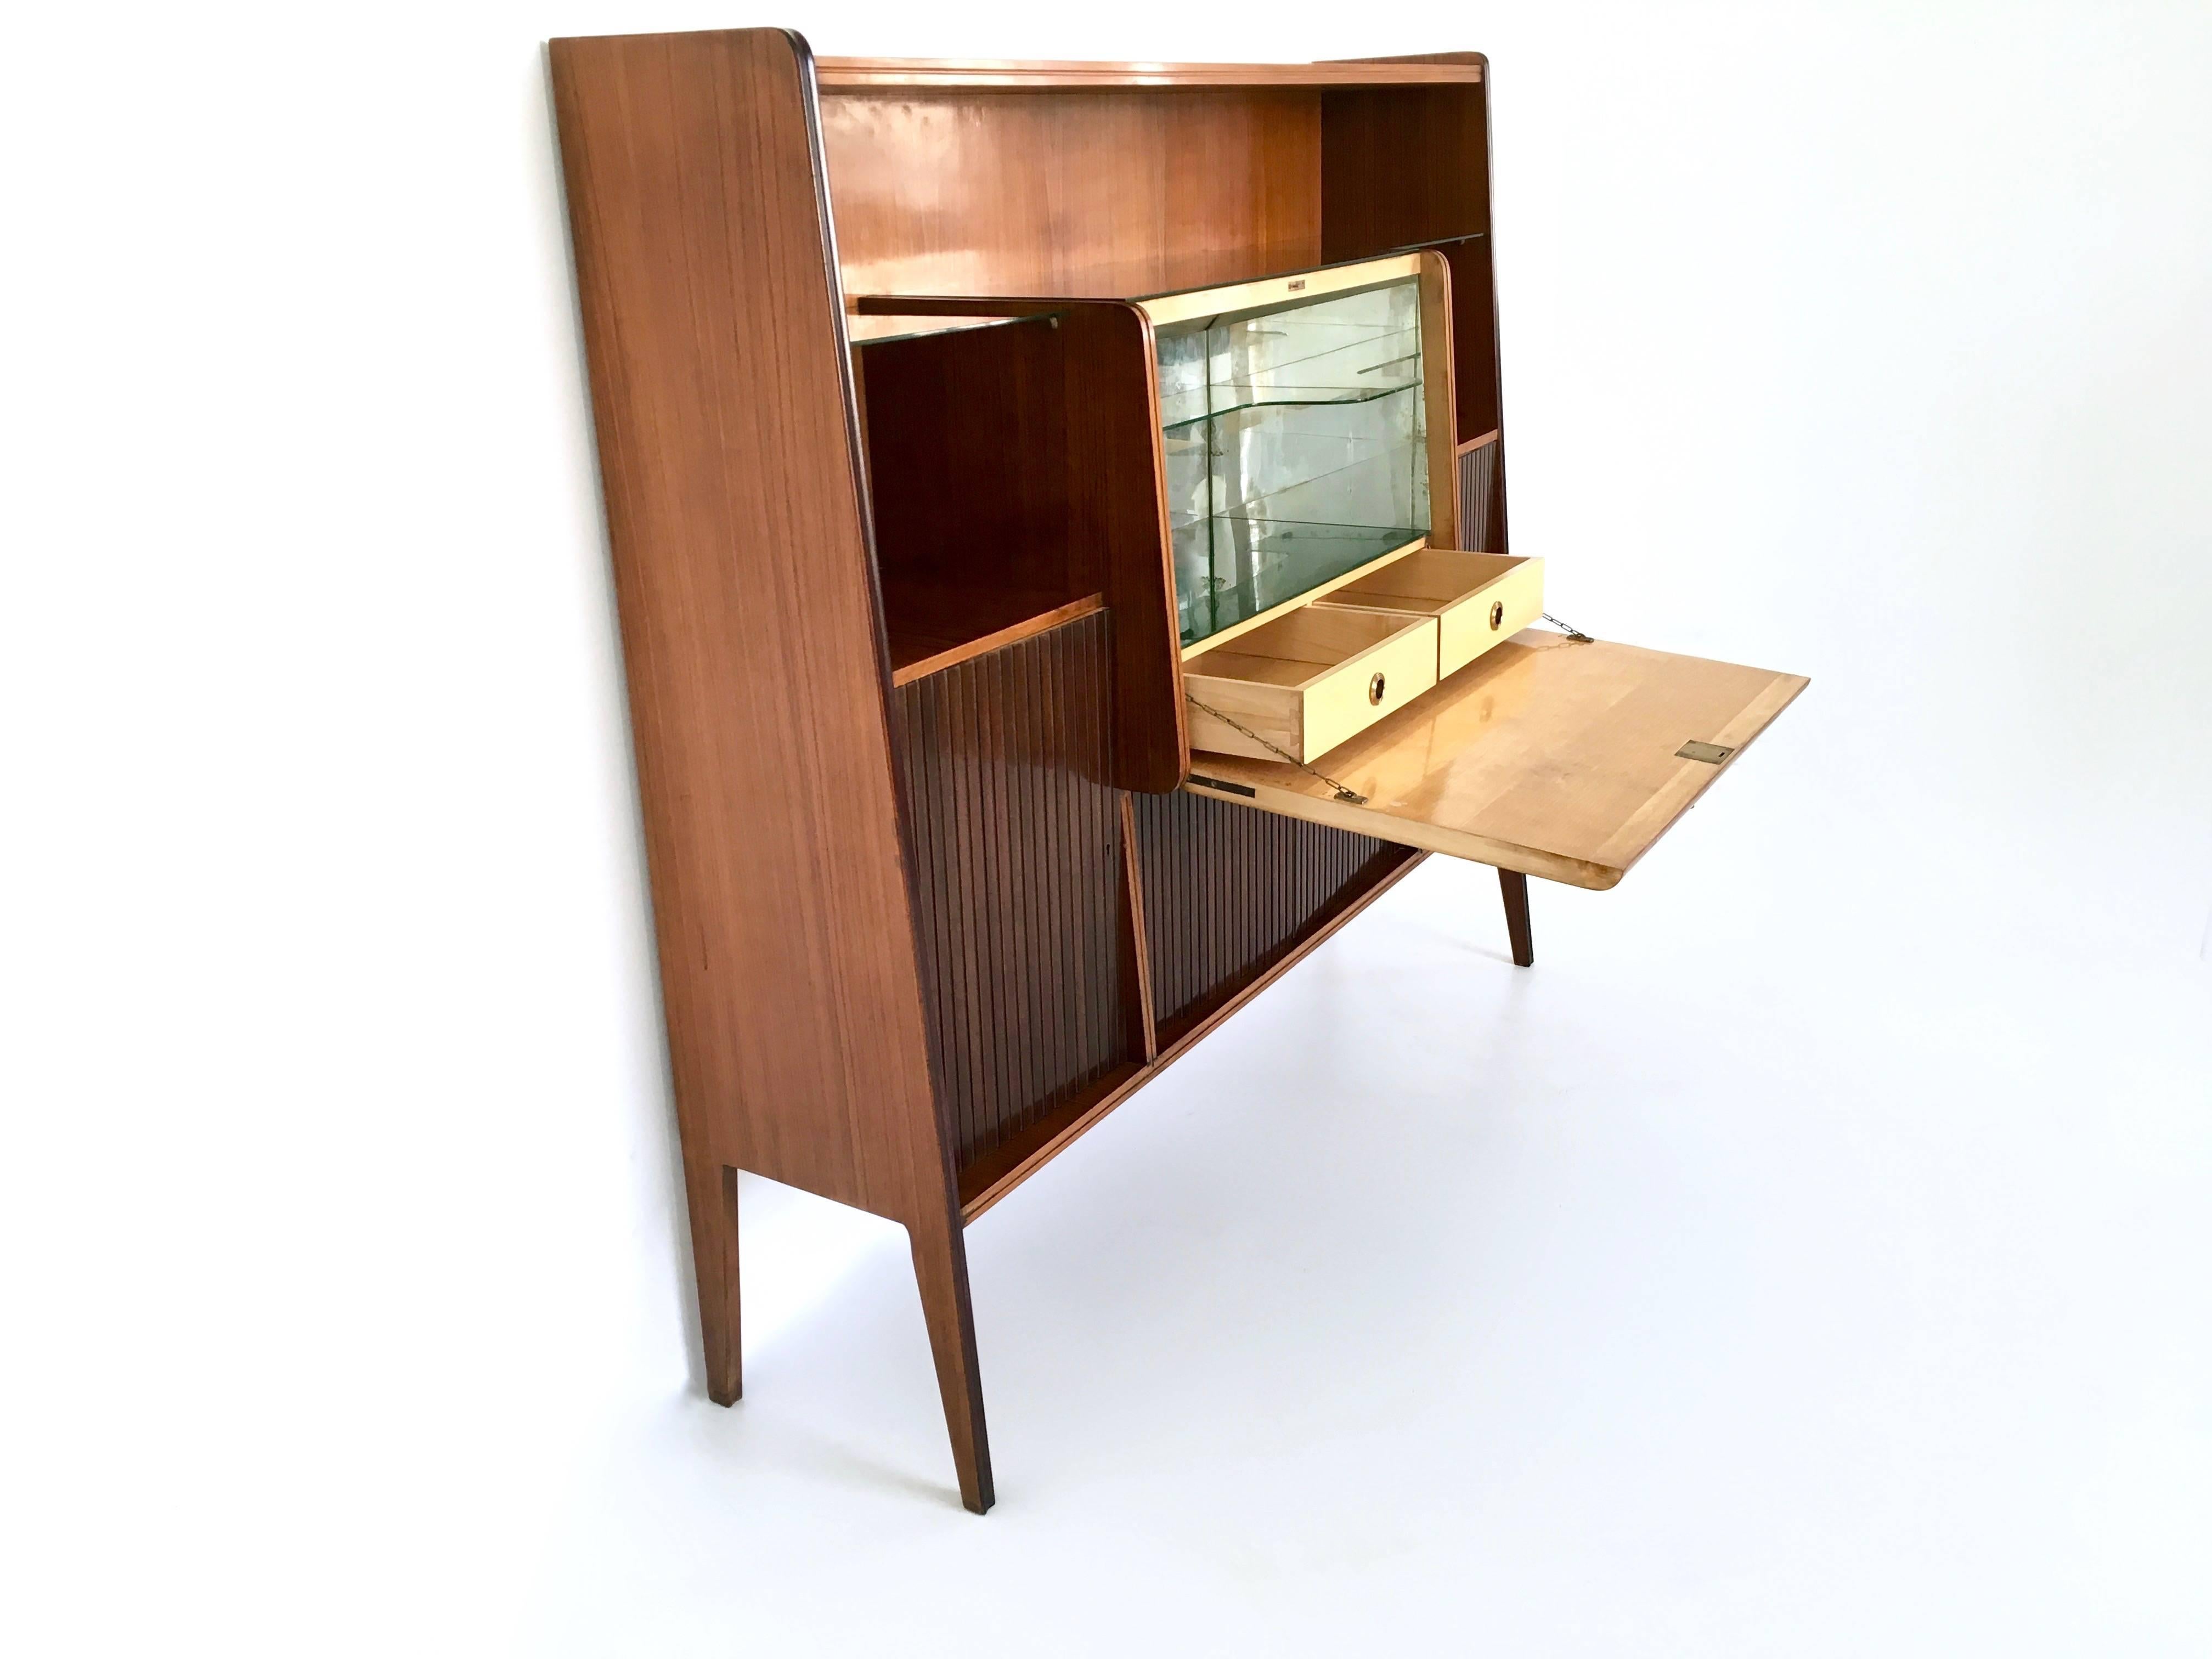 Ebonized Majestic Wood, Crystal and Mirror Bar Cabinet, Italy, 1950s